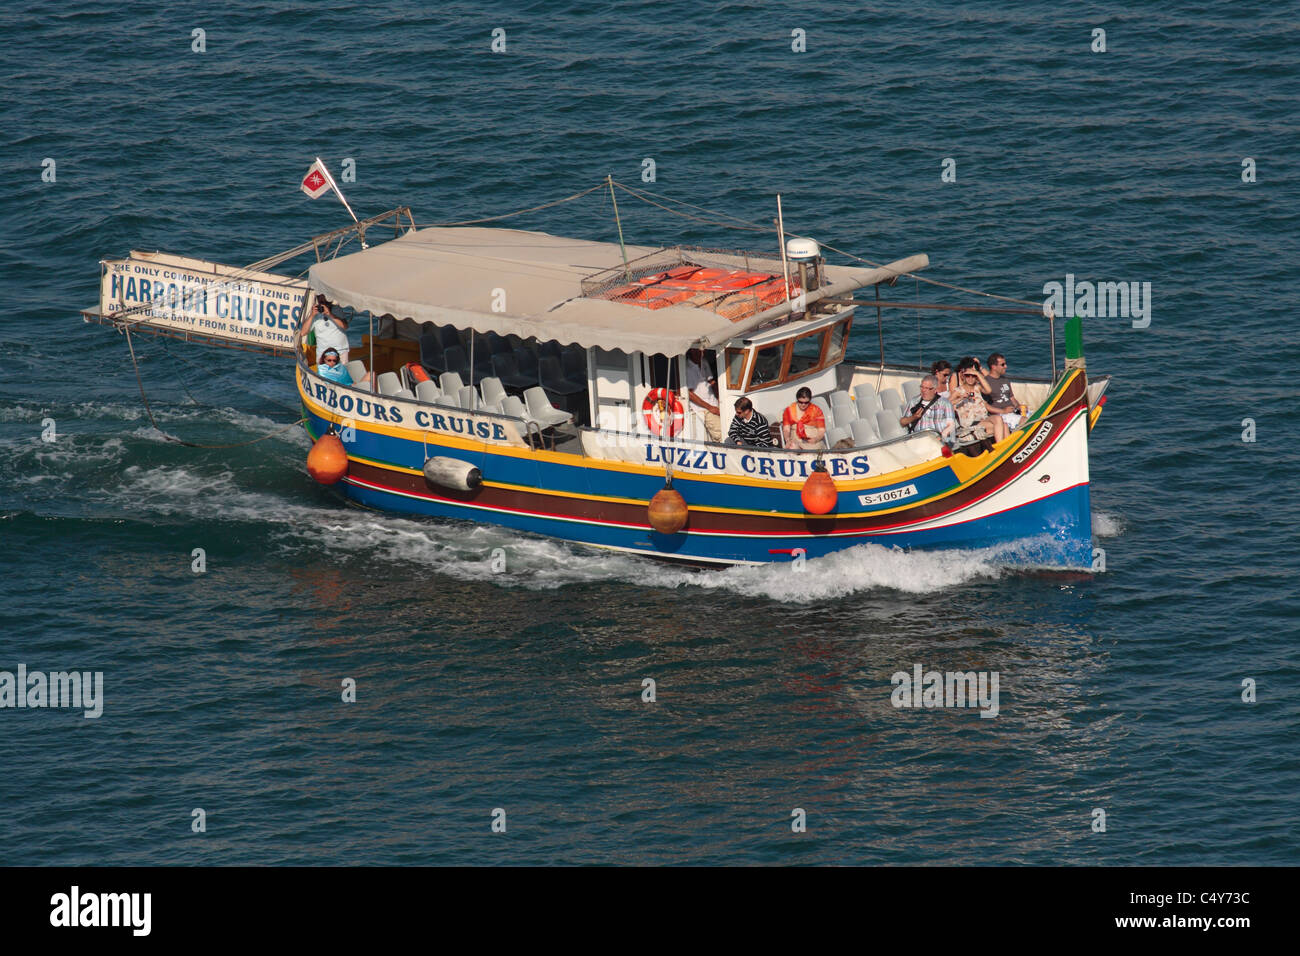 Tourism in Malta. Maltese luzzu converted as a harbour tour boat. Holiday travel in the Mediterranean. Stock Photo